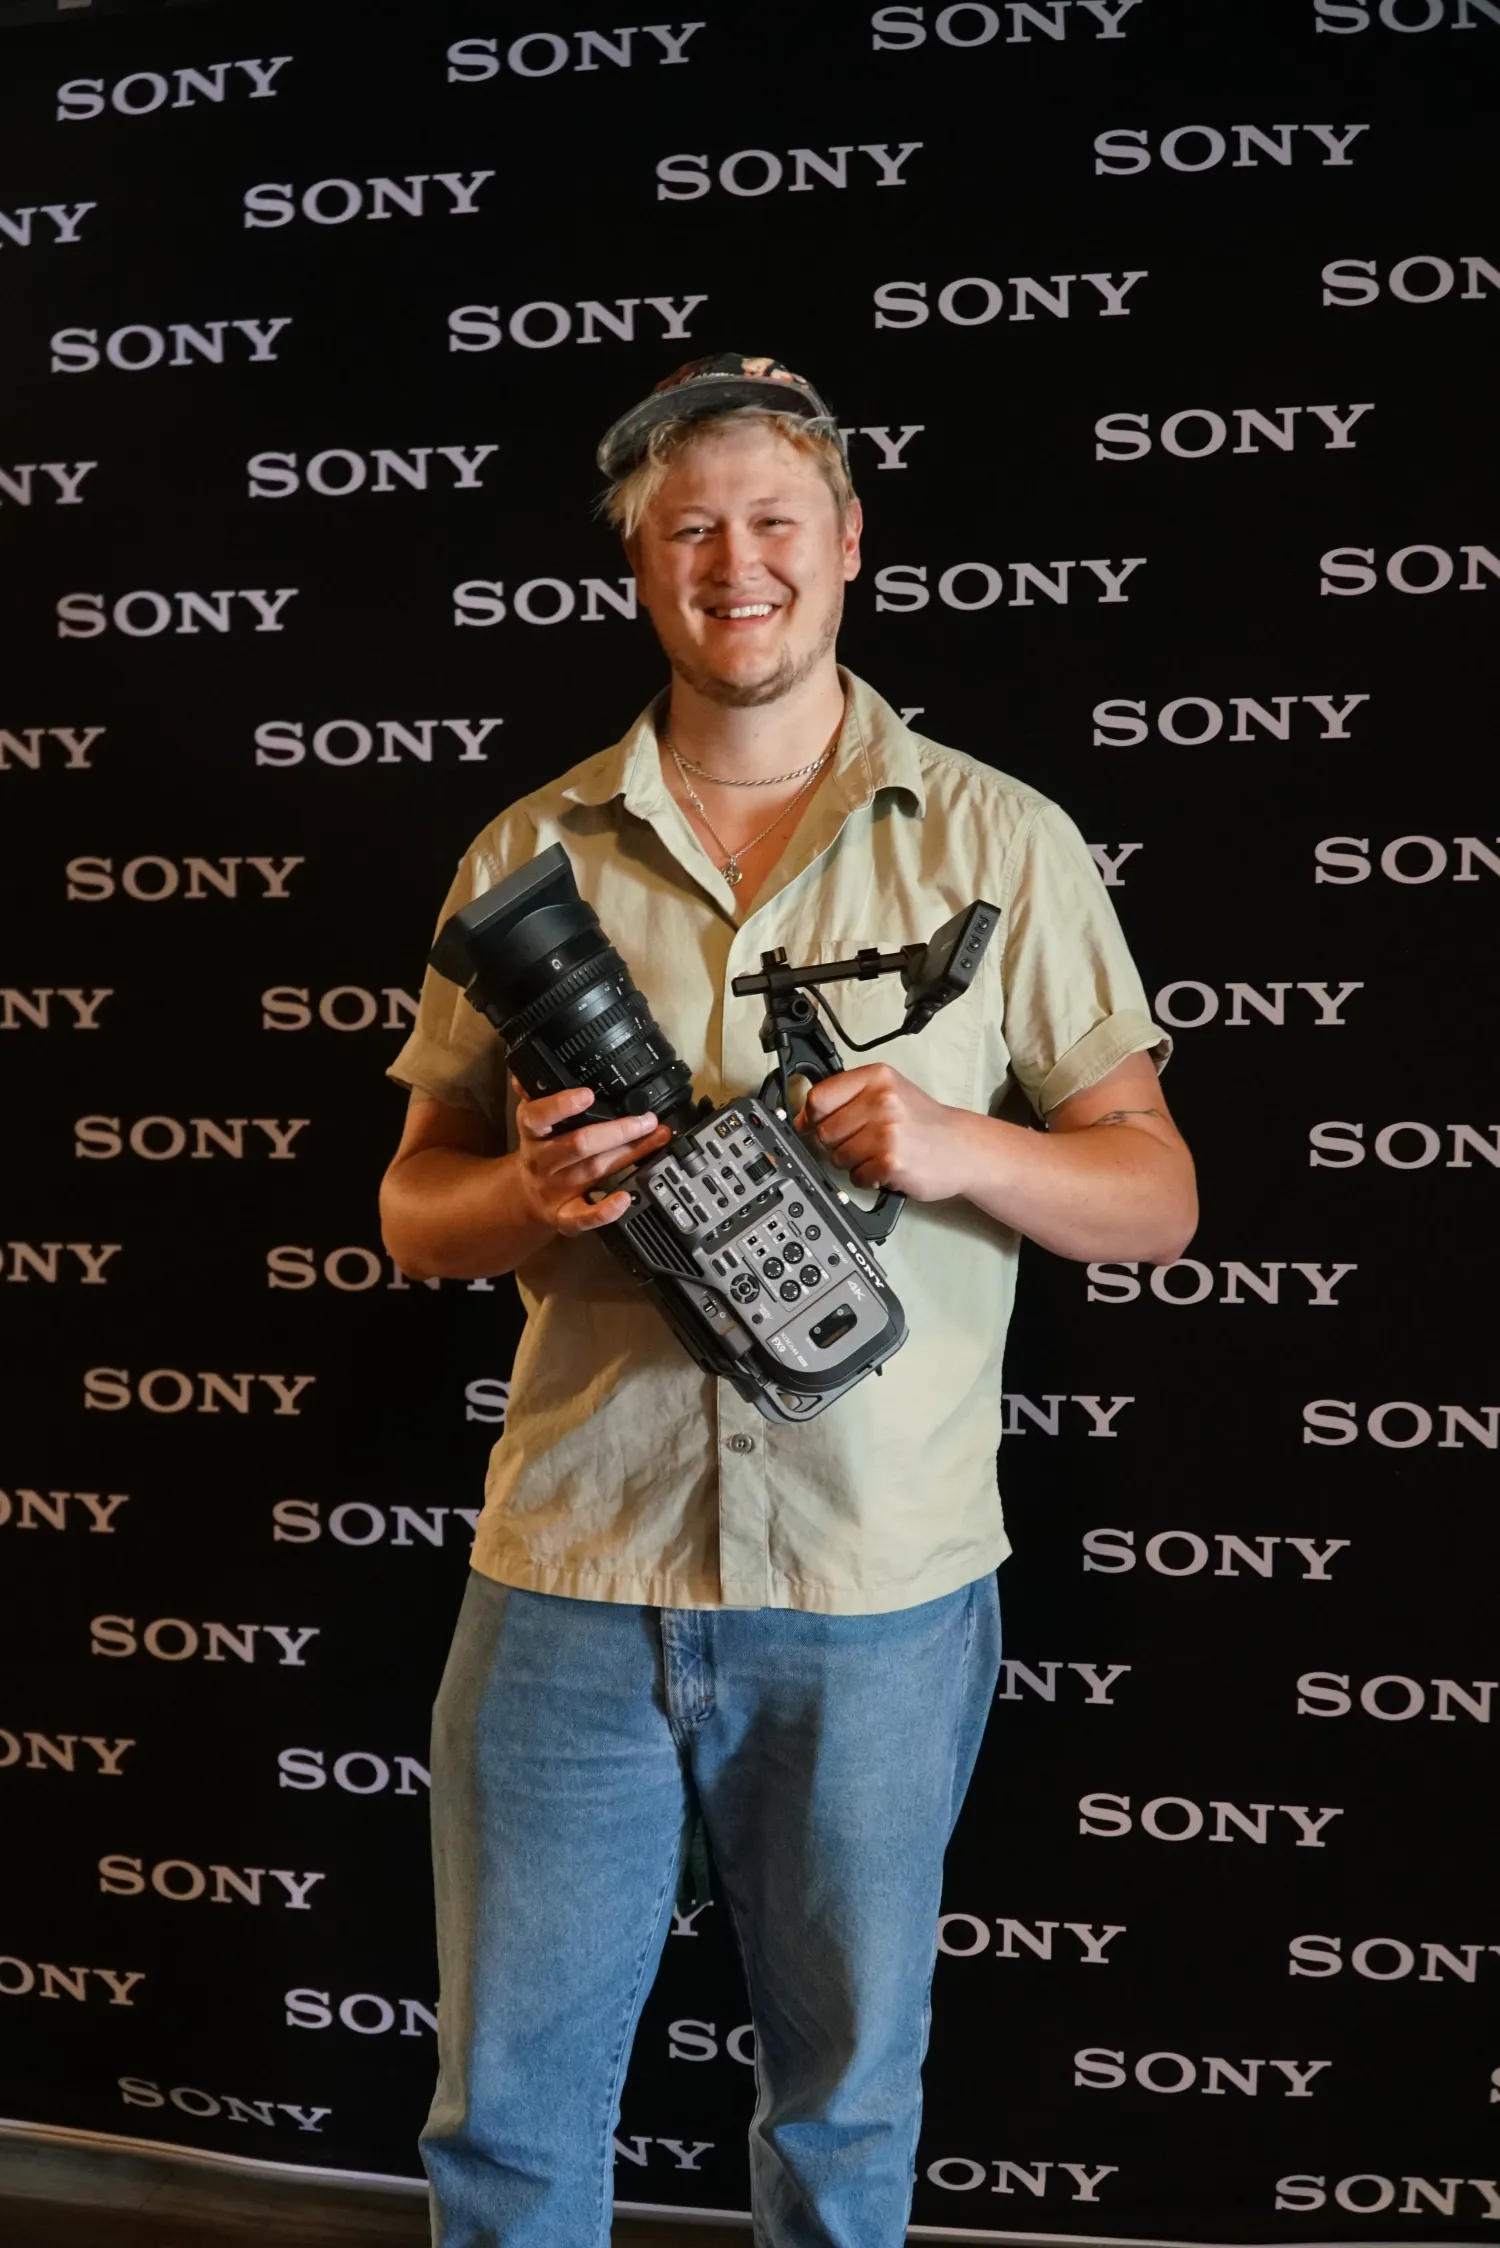 Dan Thorburn at Sony's Studio in Pinewood with his prize